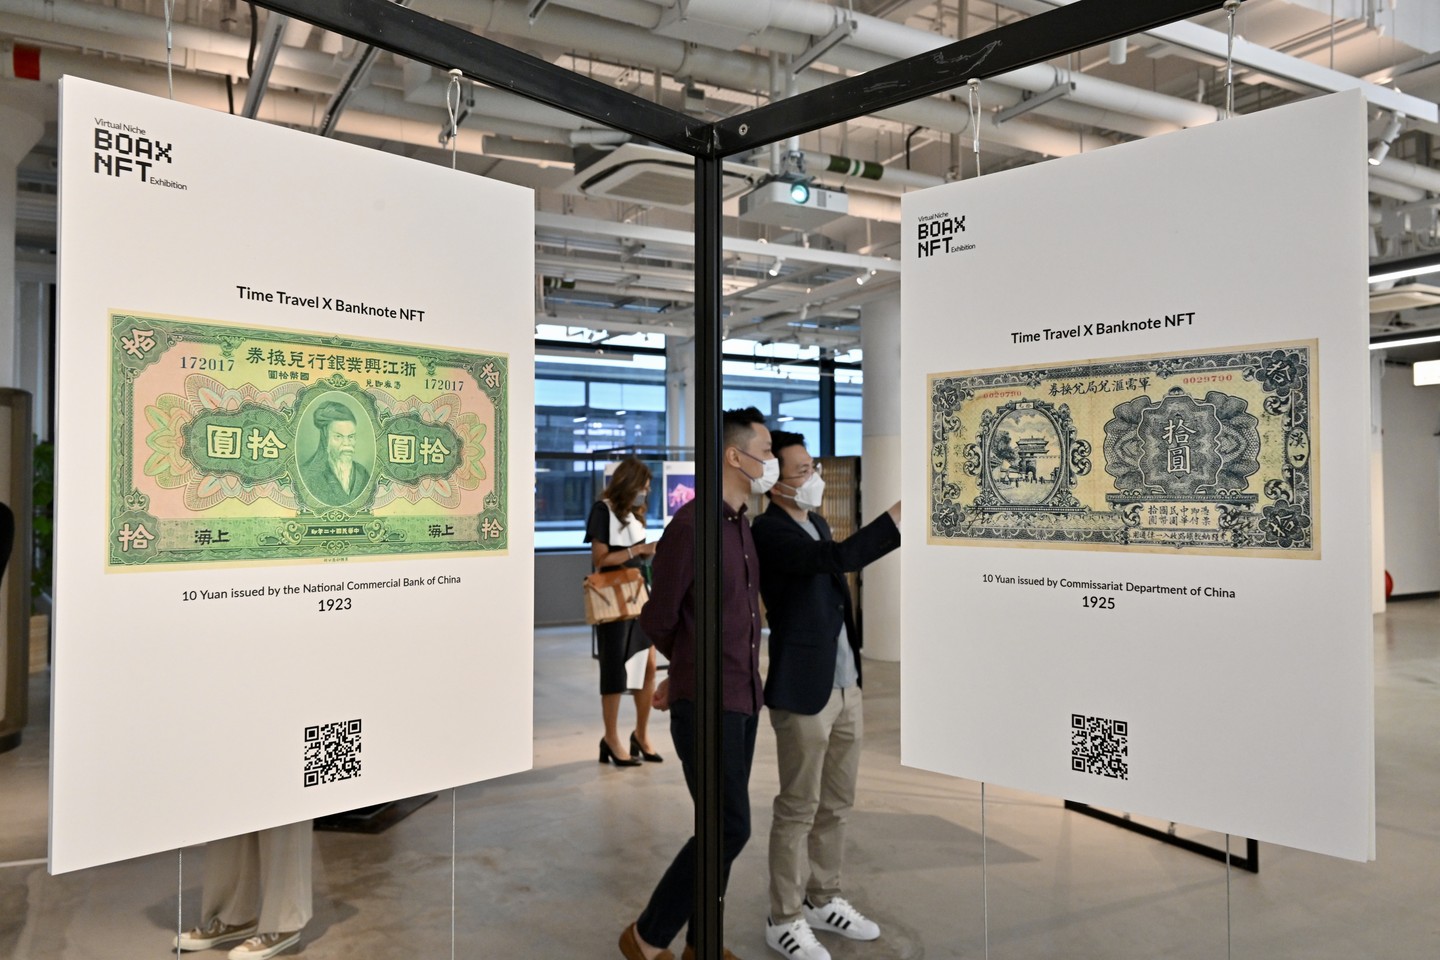 EXHIBITION SPOTLIGHTS HK'S VIBRANT NFT MARKET NFT藝術展開拓嶄新創意之旅  Digital art, finance and technology converged at Hong Kong’s historic Central Market (May 4) where the BOAX NFT Exhibition displayed a series of NFTs (non-fungible tokens), including first of its kind in the world - BOAX Feng Shui Art NFTs.  The exhibition also featured "RMBits - the world’s first Chinese 3D voxel art featuring famous characters in Chinese literature", as the *adoption rate for NFTs continues to grow in Hong Kong. https://www.boax.io/home  *https://hongkongbusiness.hk/financial-services/news/nft-adoption-rate-soon-hit-211-report  由非同質化代幣(NFT)數字資產交易平台BOAX早前(5月4日)舉辦的「BOAX NFT Exhibition」，結合數碼藝術及金融科技，為歷史悠久的中環街市增添創新元素。展覽展示一系列 NFT作品，包括世界首創、揉合NFT設計美學與風水的「BOAX Feng Shui Art NFTs」等。https://www.boax.io/home  #hongkong #brandhongkong #artandculture #NFT #ArtTech #香港 #香港品牌 #亞洲國際都會 #文化藝術 #藝術科技 #NFT